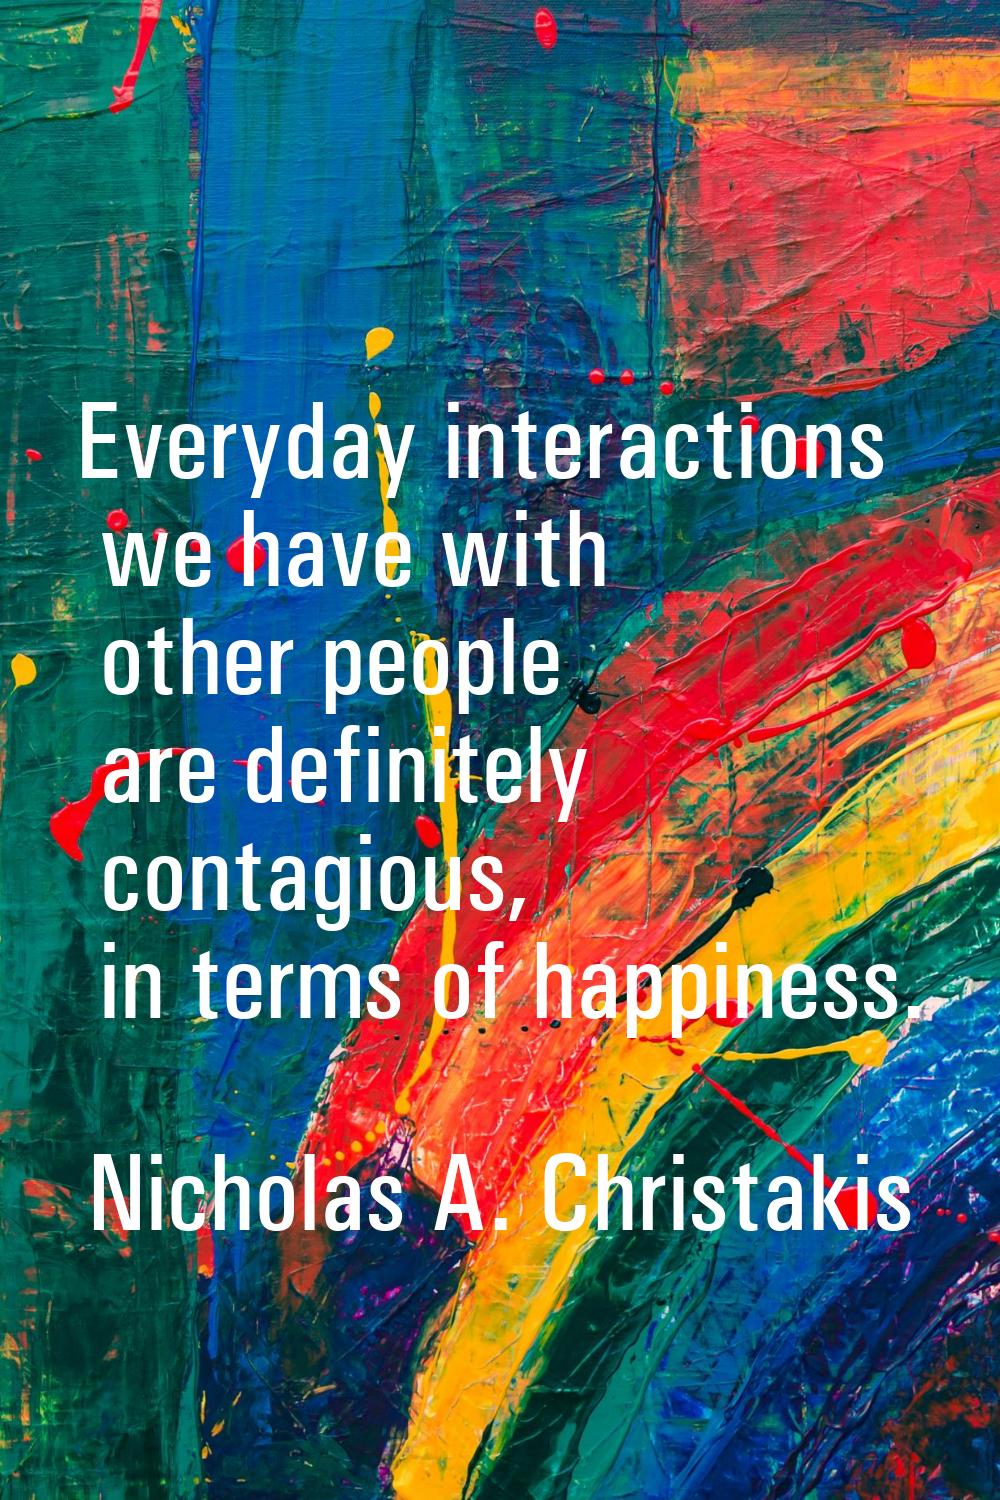 Everyday interactions we have with other people are definitely contagious, in terms of happiness.